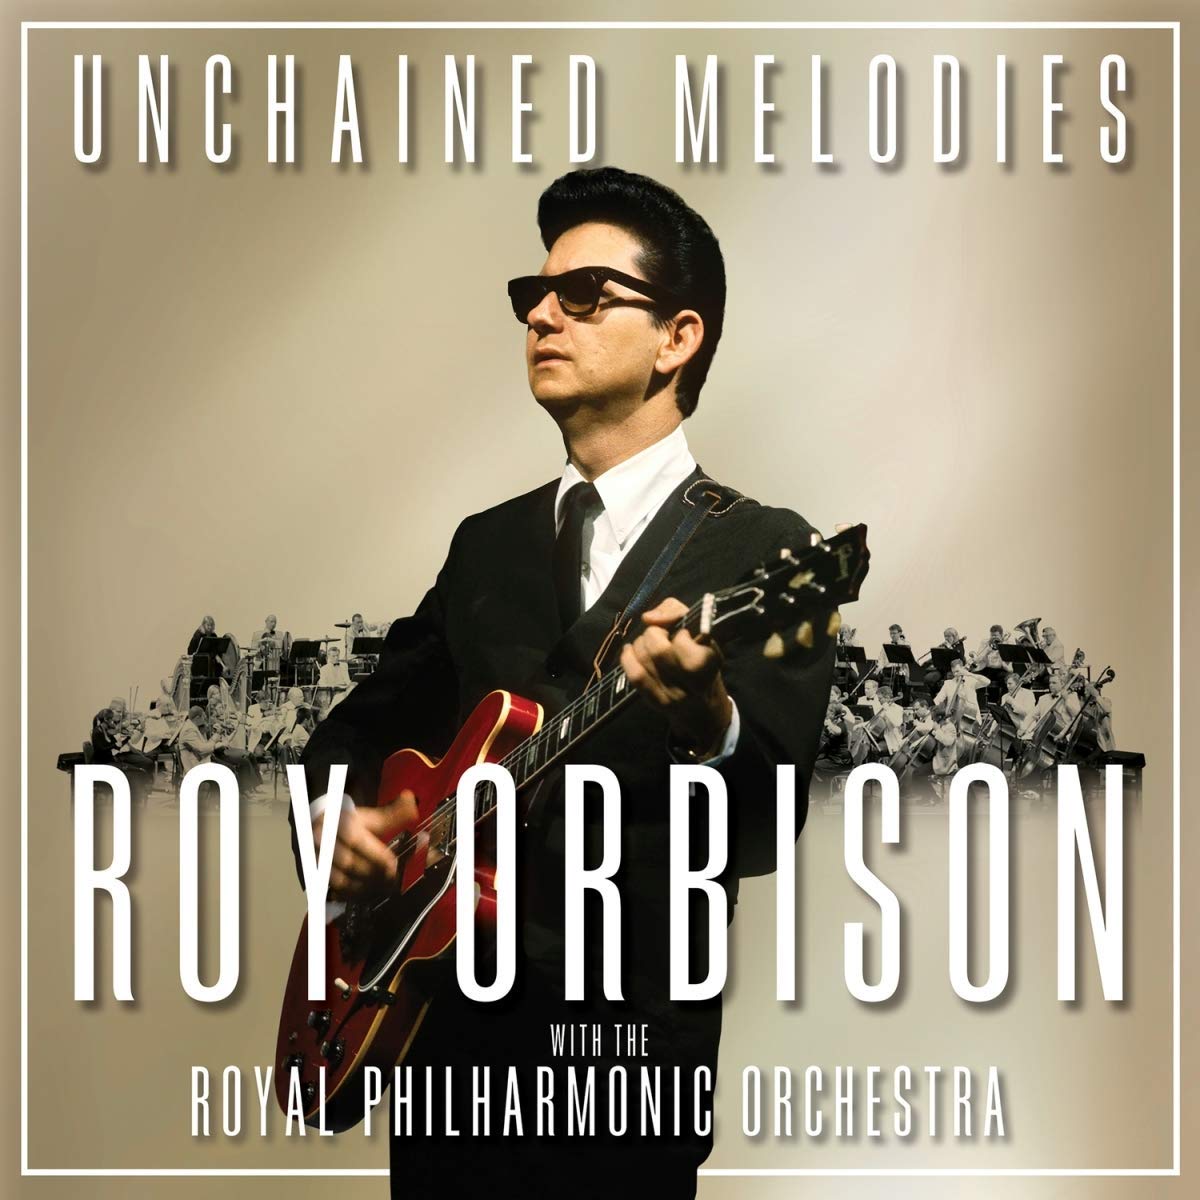 UNCHAINED MELODIES: ROY ORBISON & THE RO